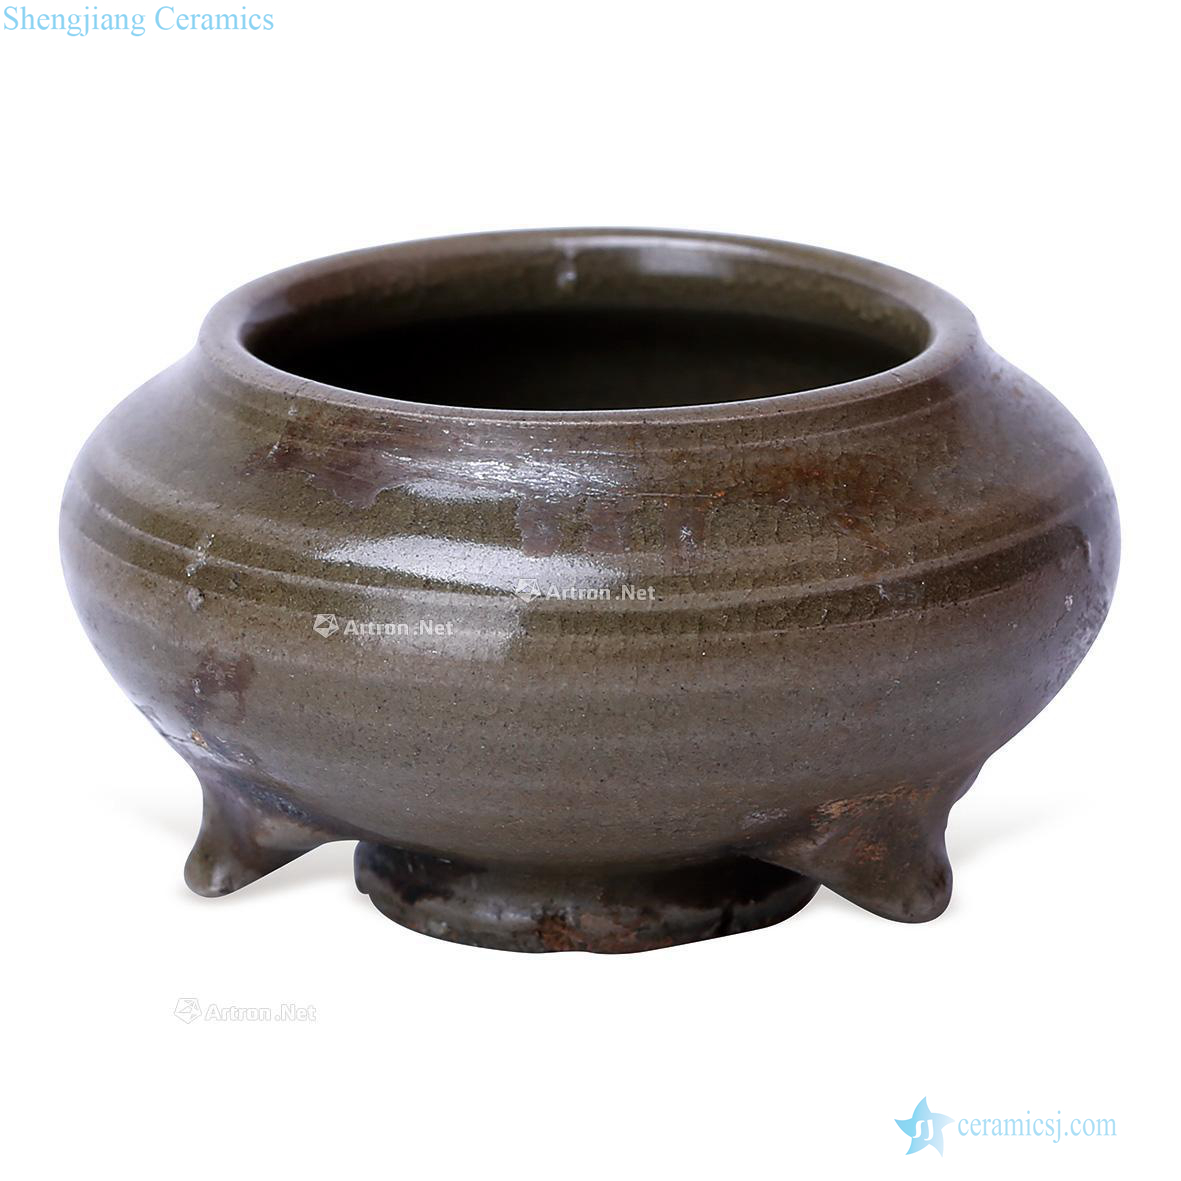 The song dynasty Longquan celadon glaze furnace with three legs